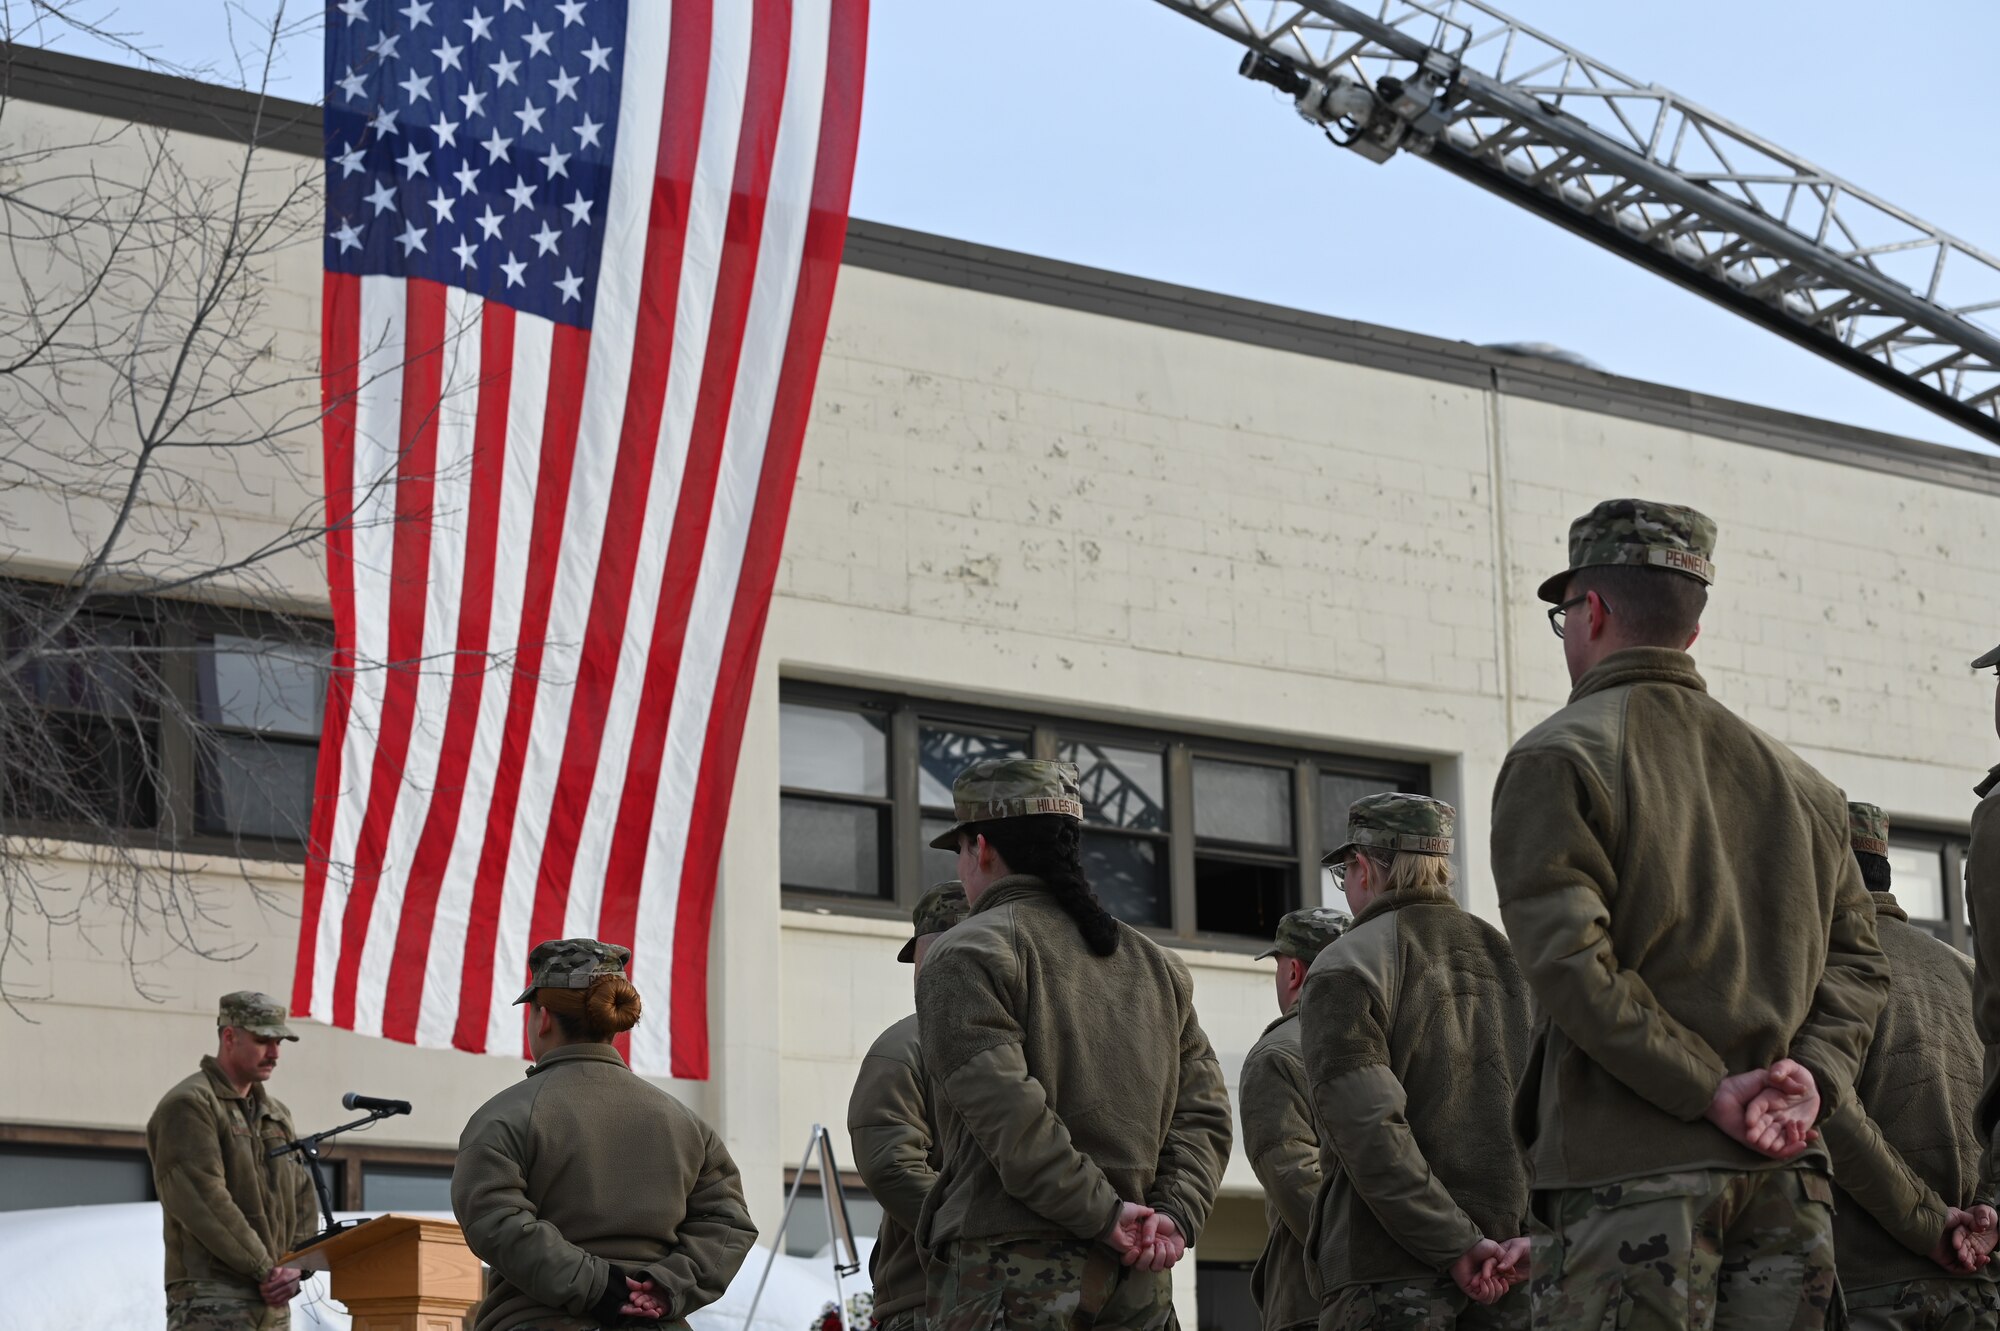 Each year, the 673d Logistic Readiness Squadron honors the life and legacy of Bowles, who died on March 15, 2009, supporting Operation Enduring Freedom in Eastern Afghanistan.